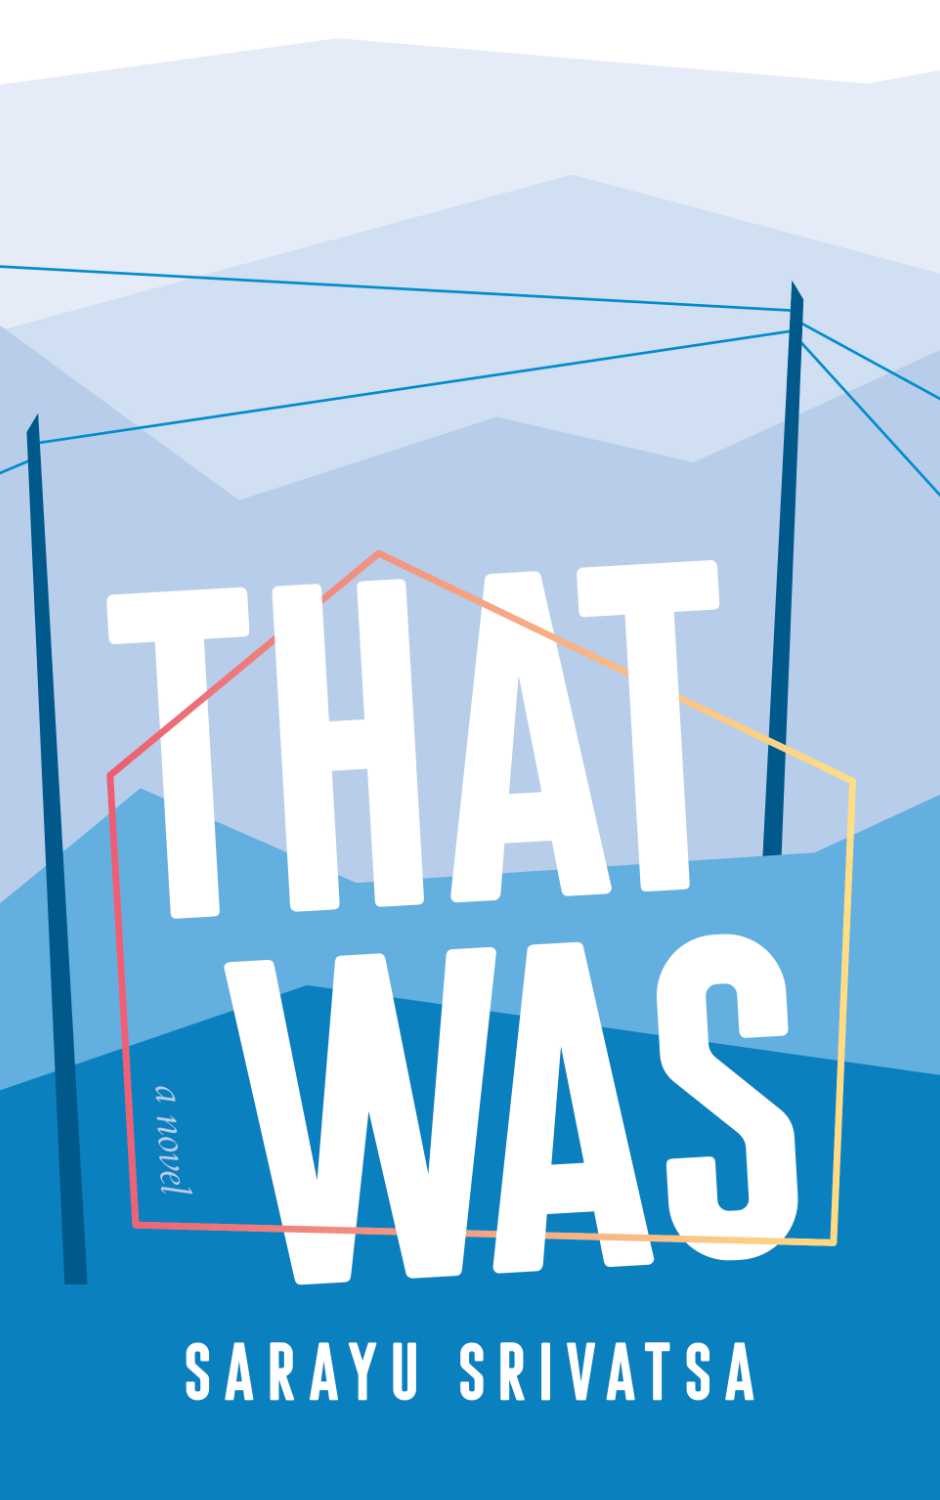 The cover features the title of the book in large slanted text within a single-lined outline of a house (in red and orange) and an angular background depicting a mountainous landscape.